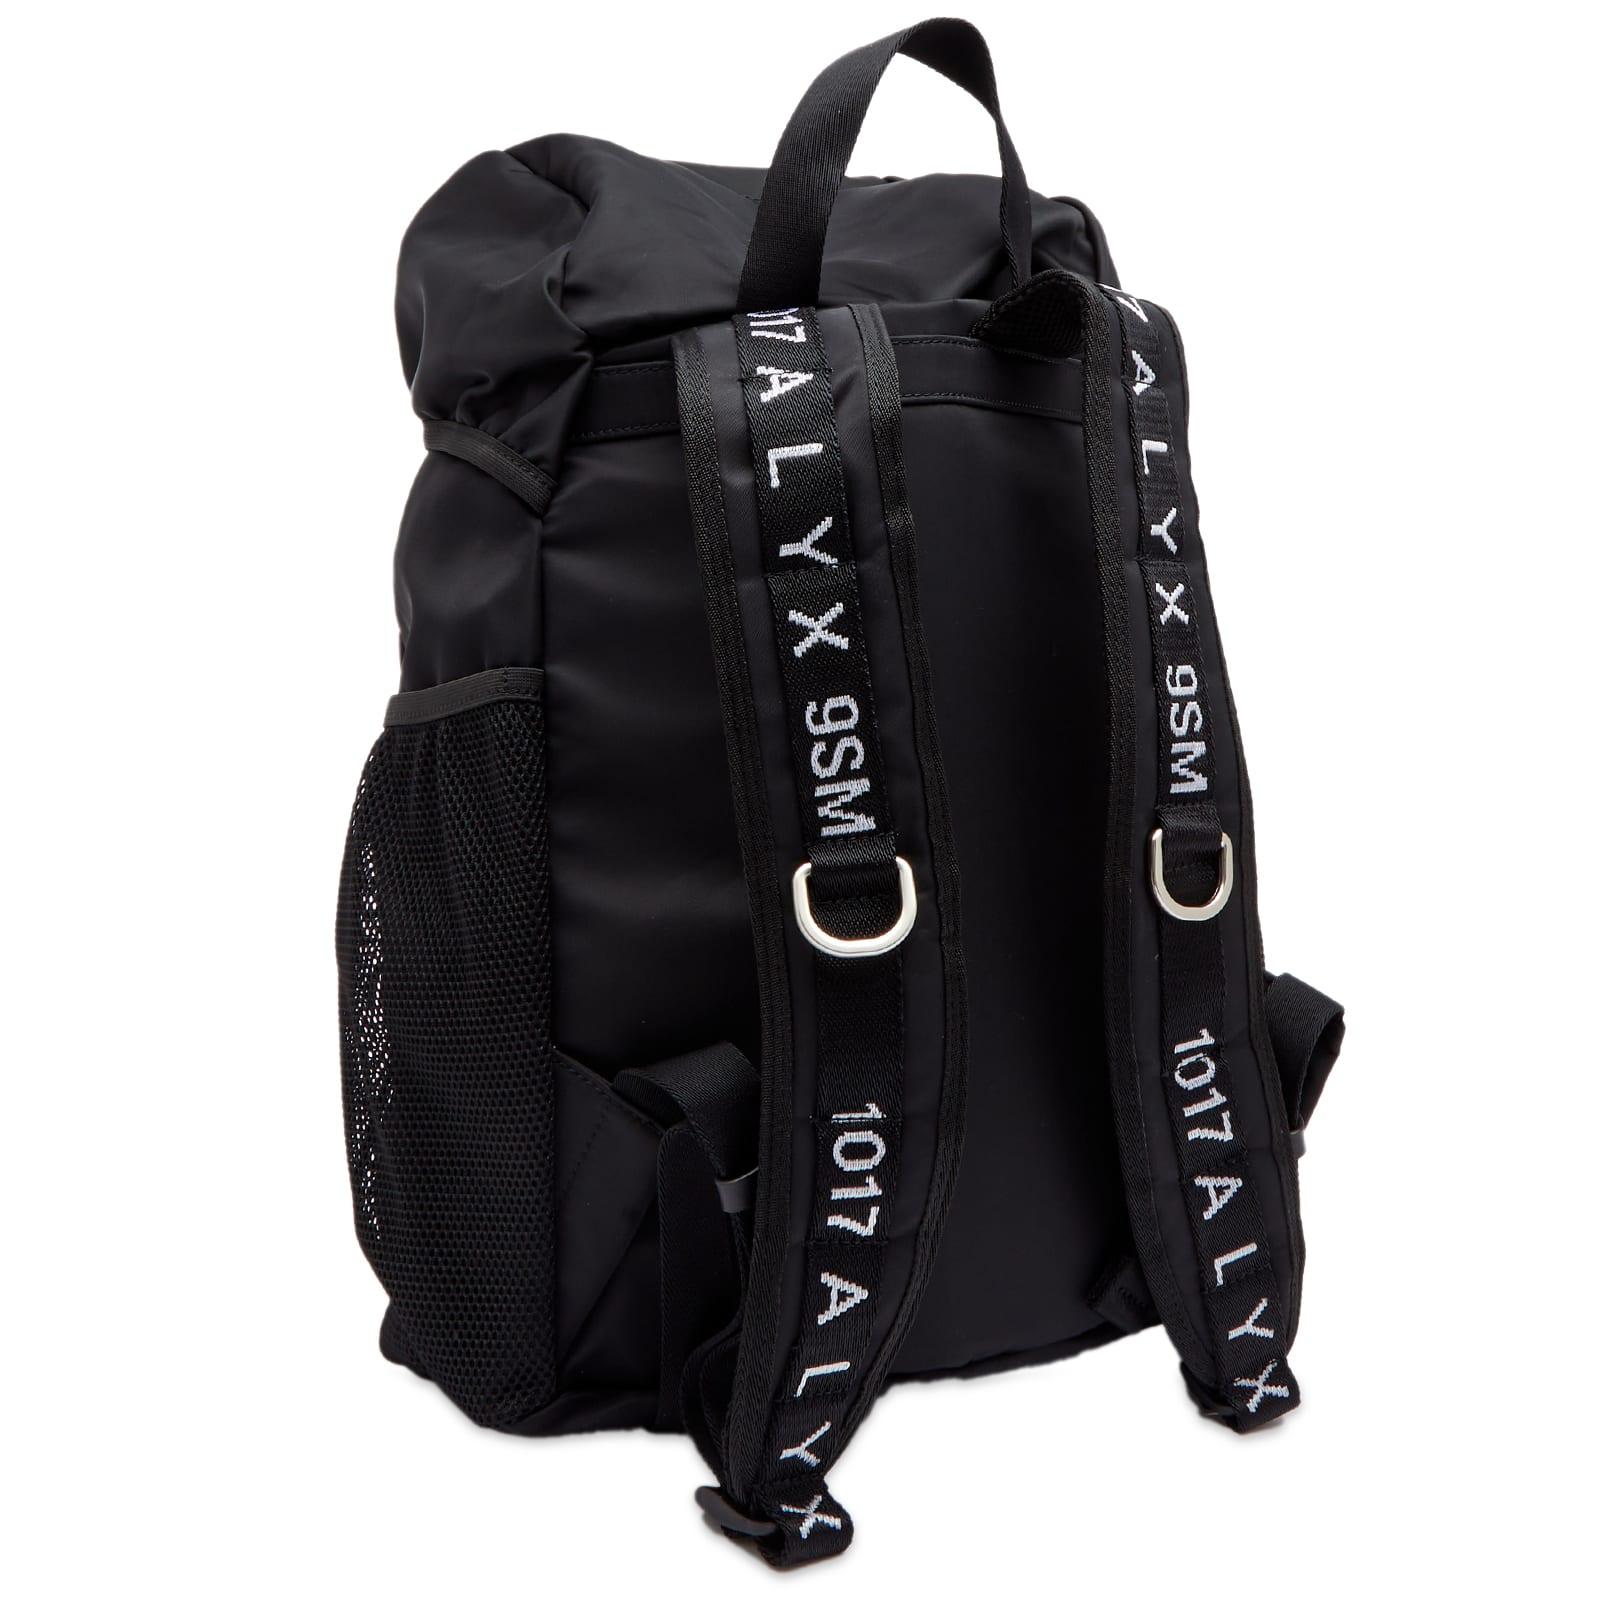 1017 ALYX 9SM Backpack - X Black Nylon Backpack With Rollercoaster